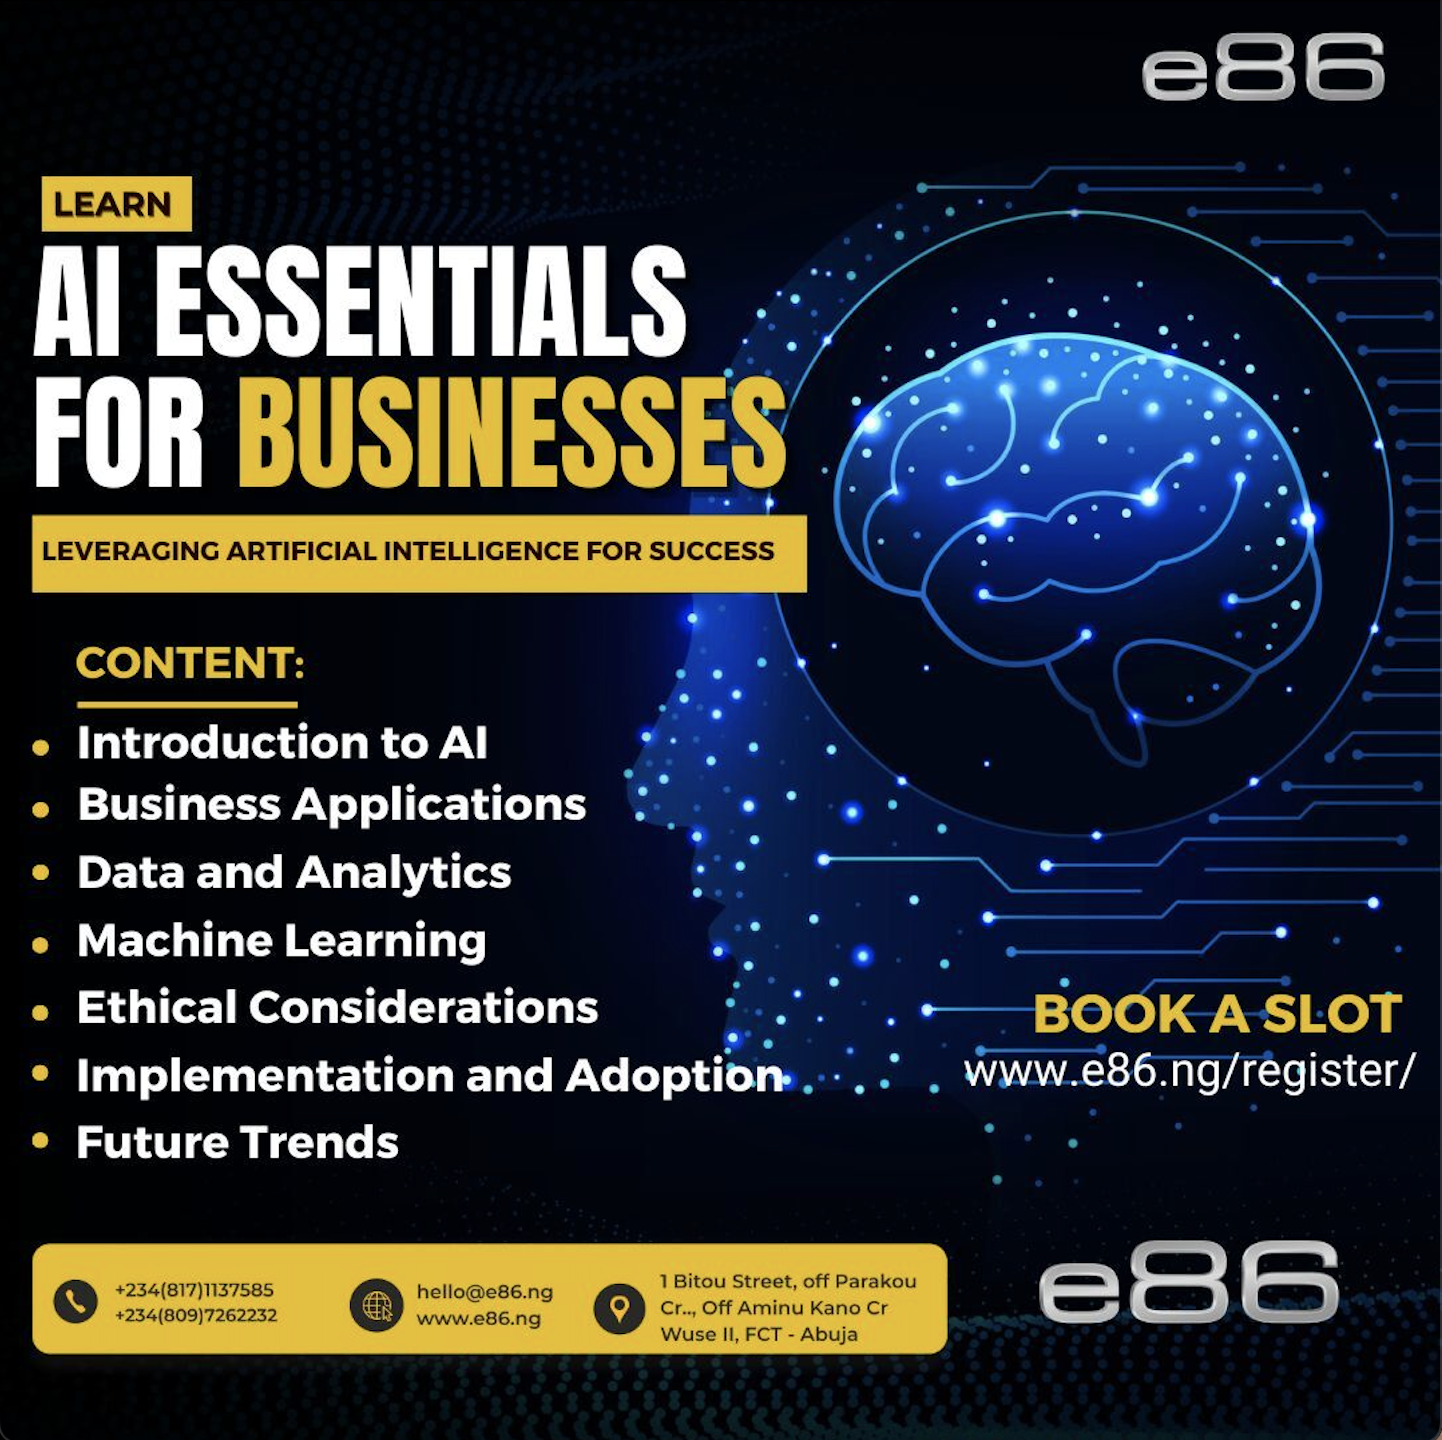 AI Essentials for Businesses: Leveraging Artificial Intelligence for Success